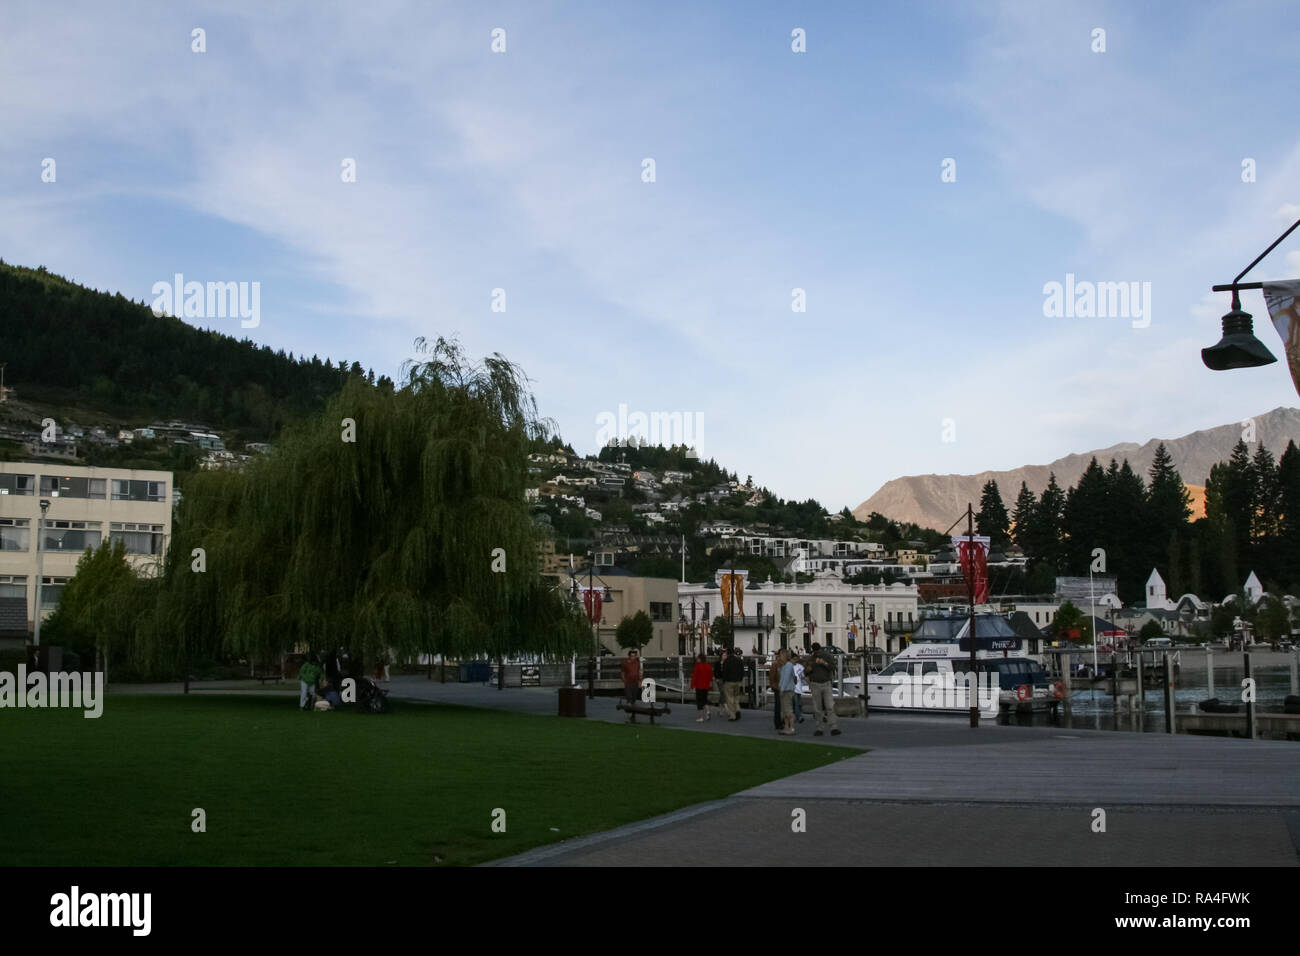 Queenstown, New Zealand - February 23, 2014: View of the city of Queenstown and adjacent territories. Landscapes of New Zealand. Stock Photo